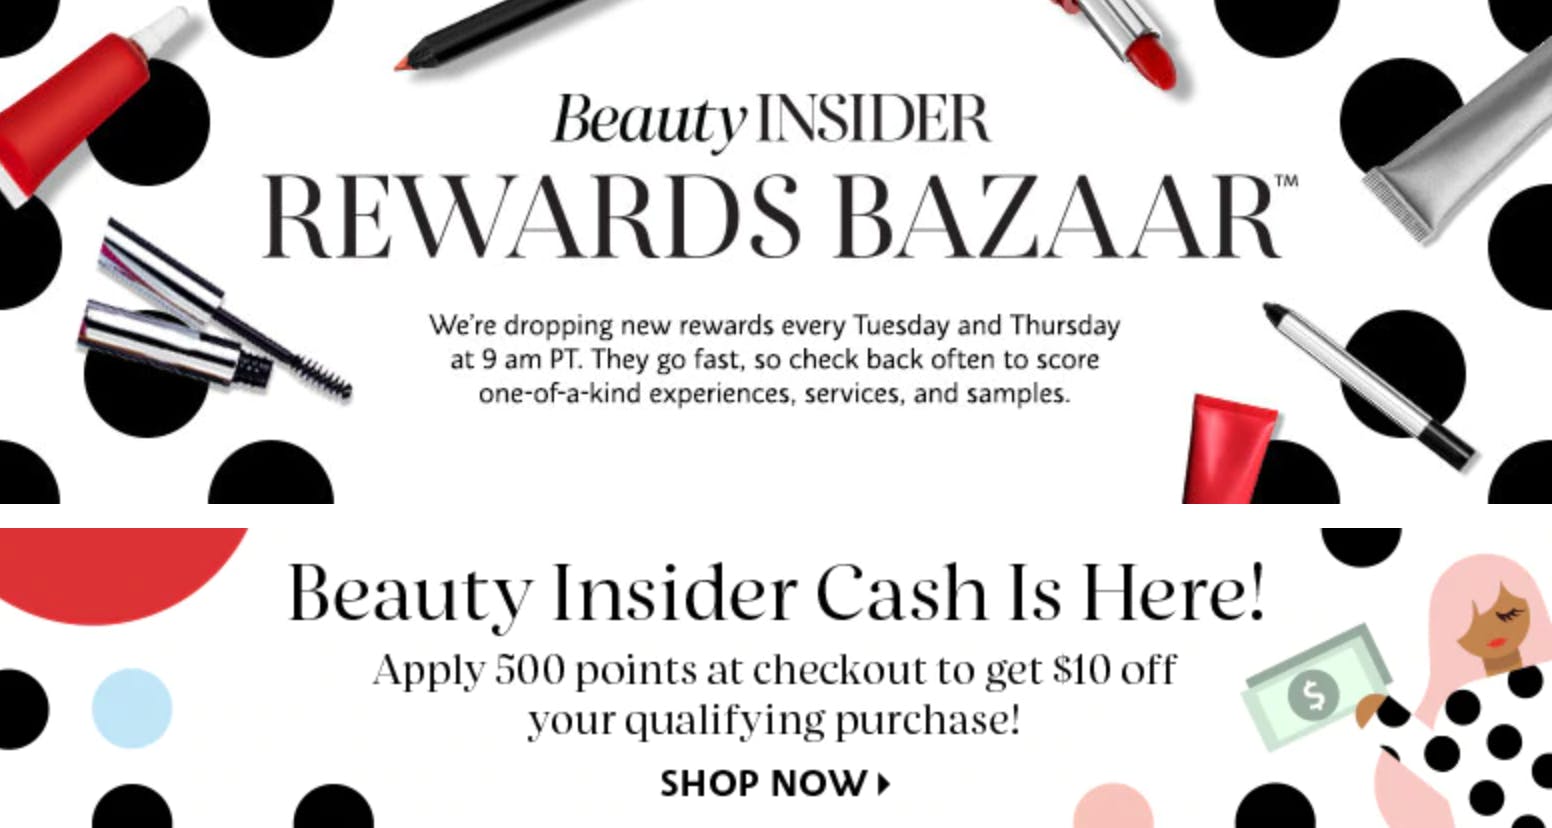 A page from Sephora's website that says beauty insider rewards bazaar